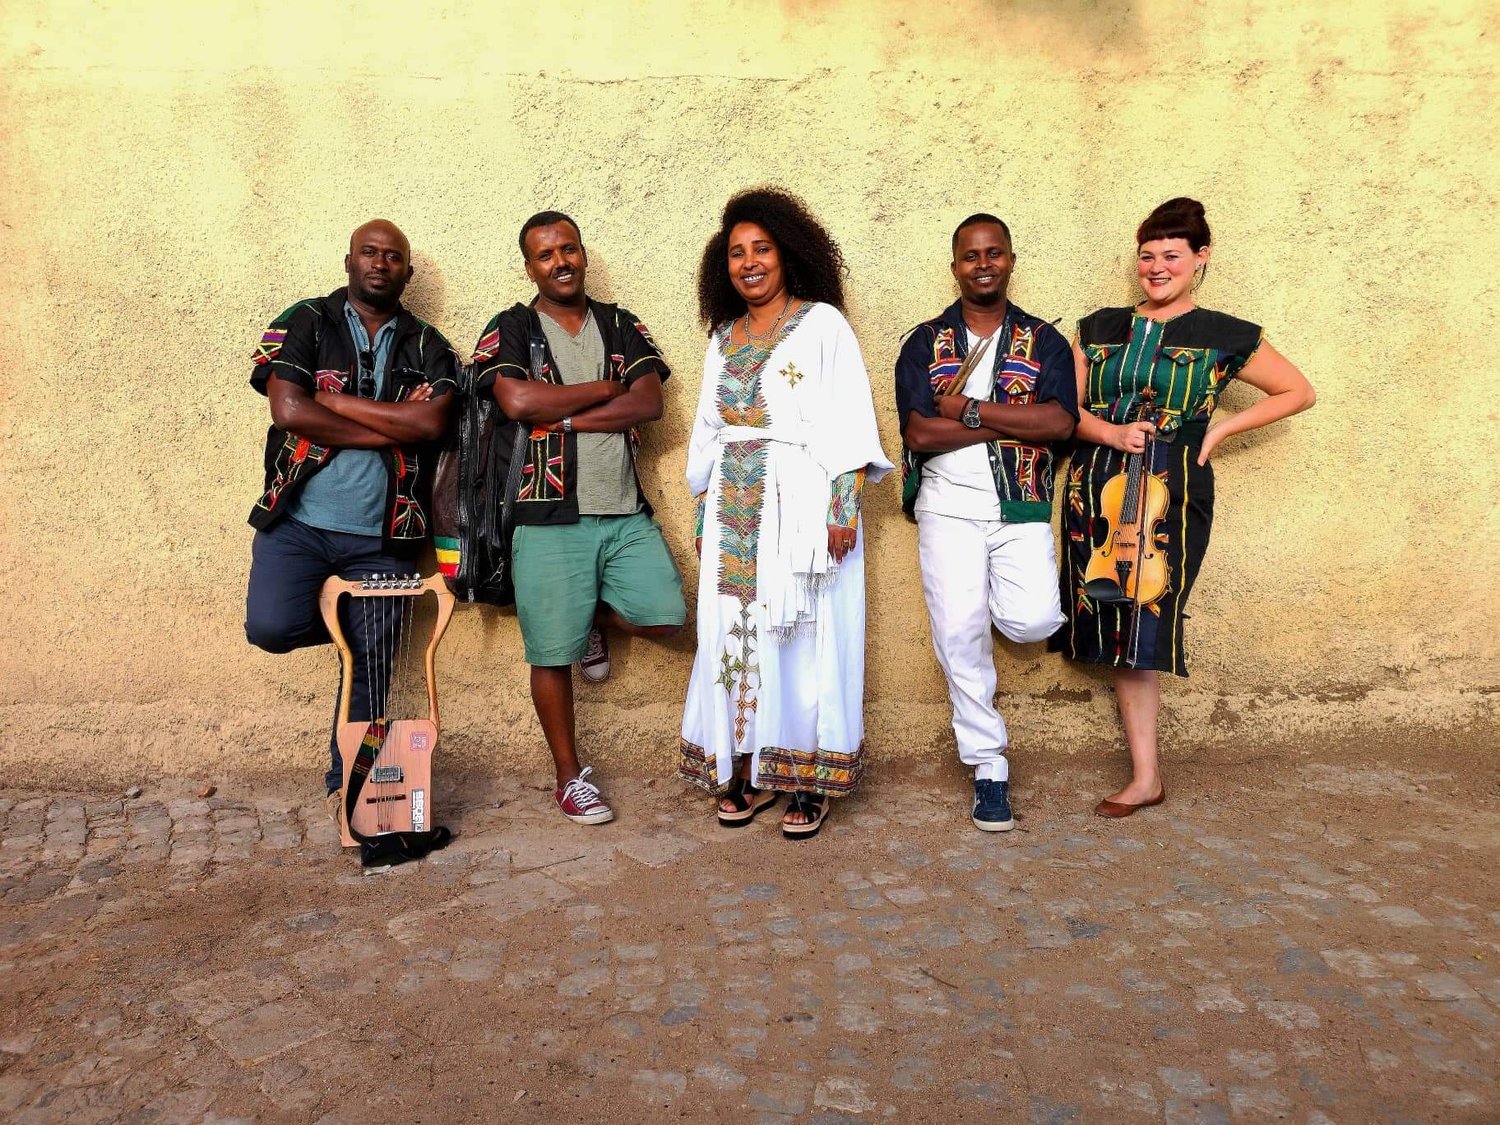 Anaar Desai-Stephens: “The Road to QWANQWA: A Case Study of Collaborative Leadership through a Musical Ensemble from Addis Ababa, Ethiopia.”